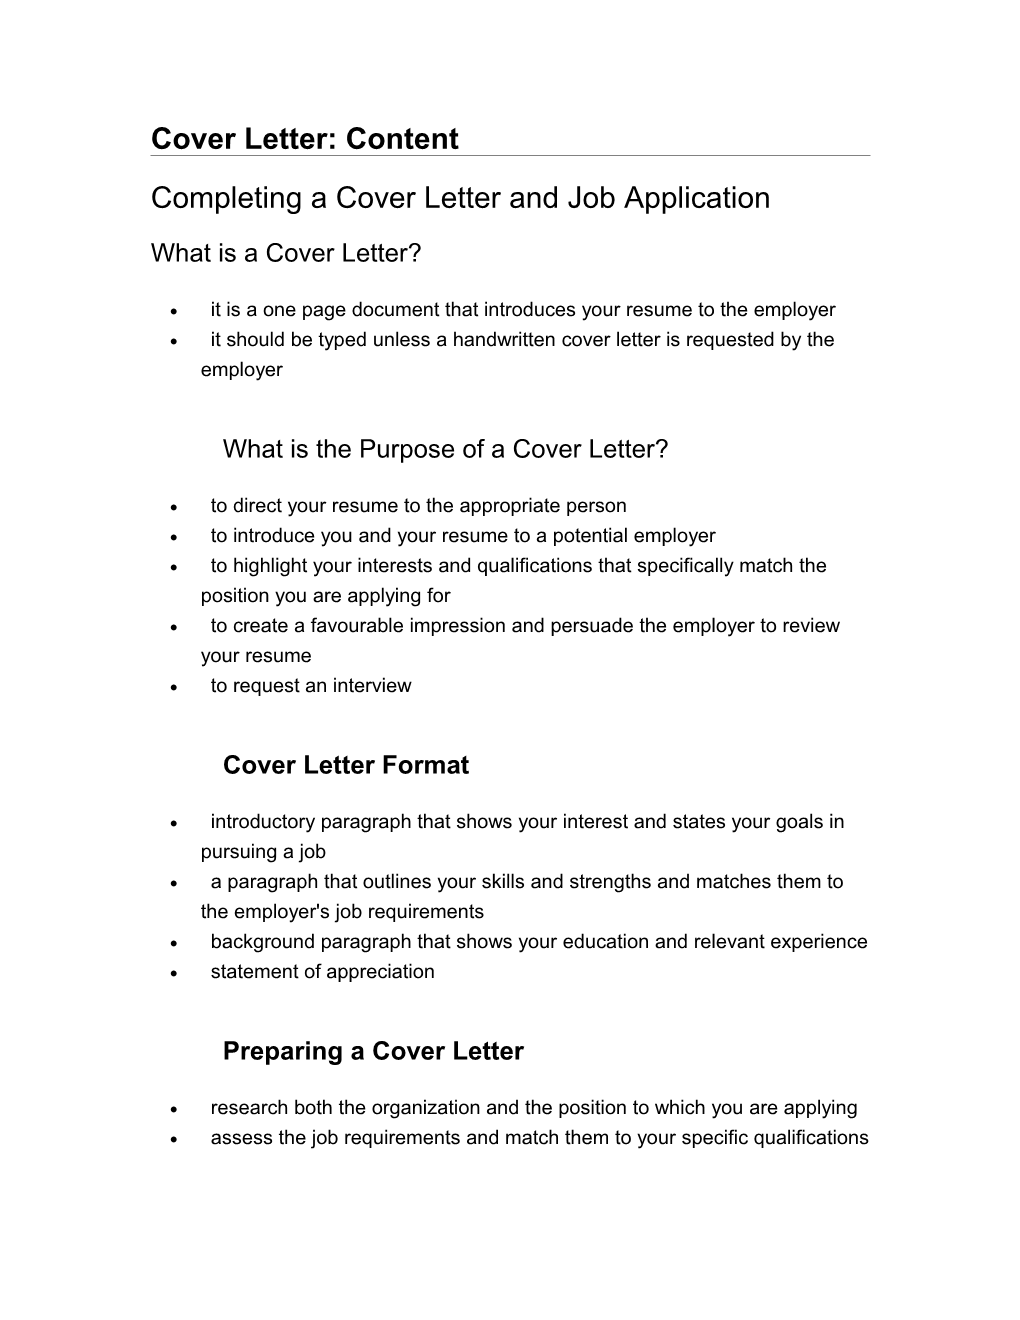 Cover Letter: Content